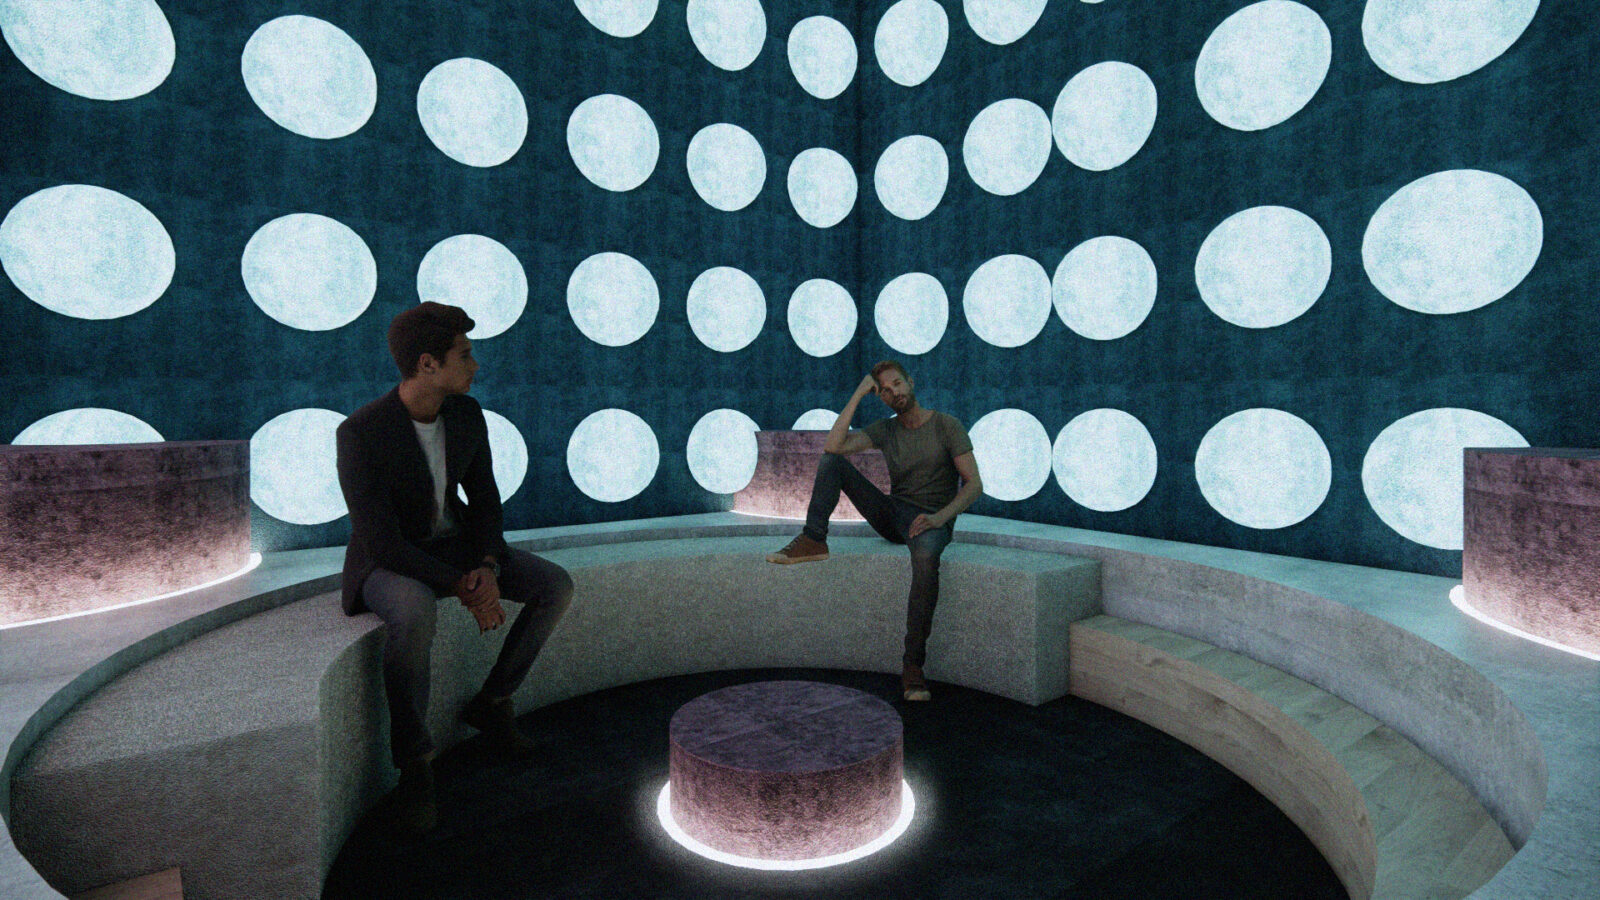 Therapy room at The Residence, which features sphere structures on the walls and a soft ambience, allowing users to connect to their inner thoughts